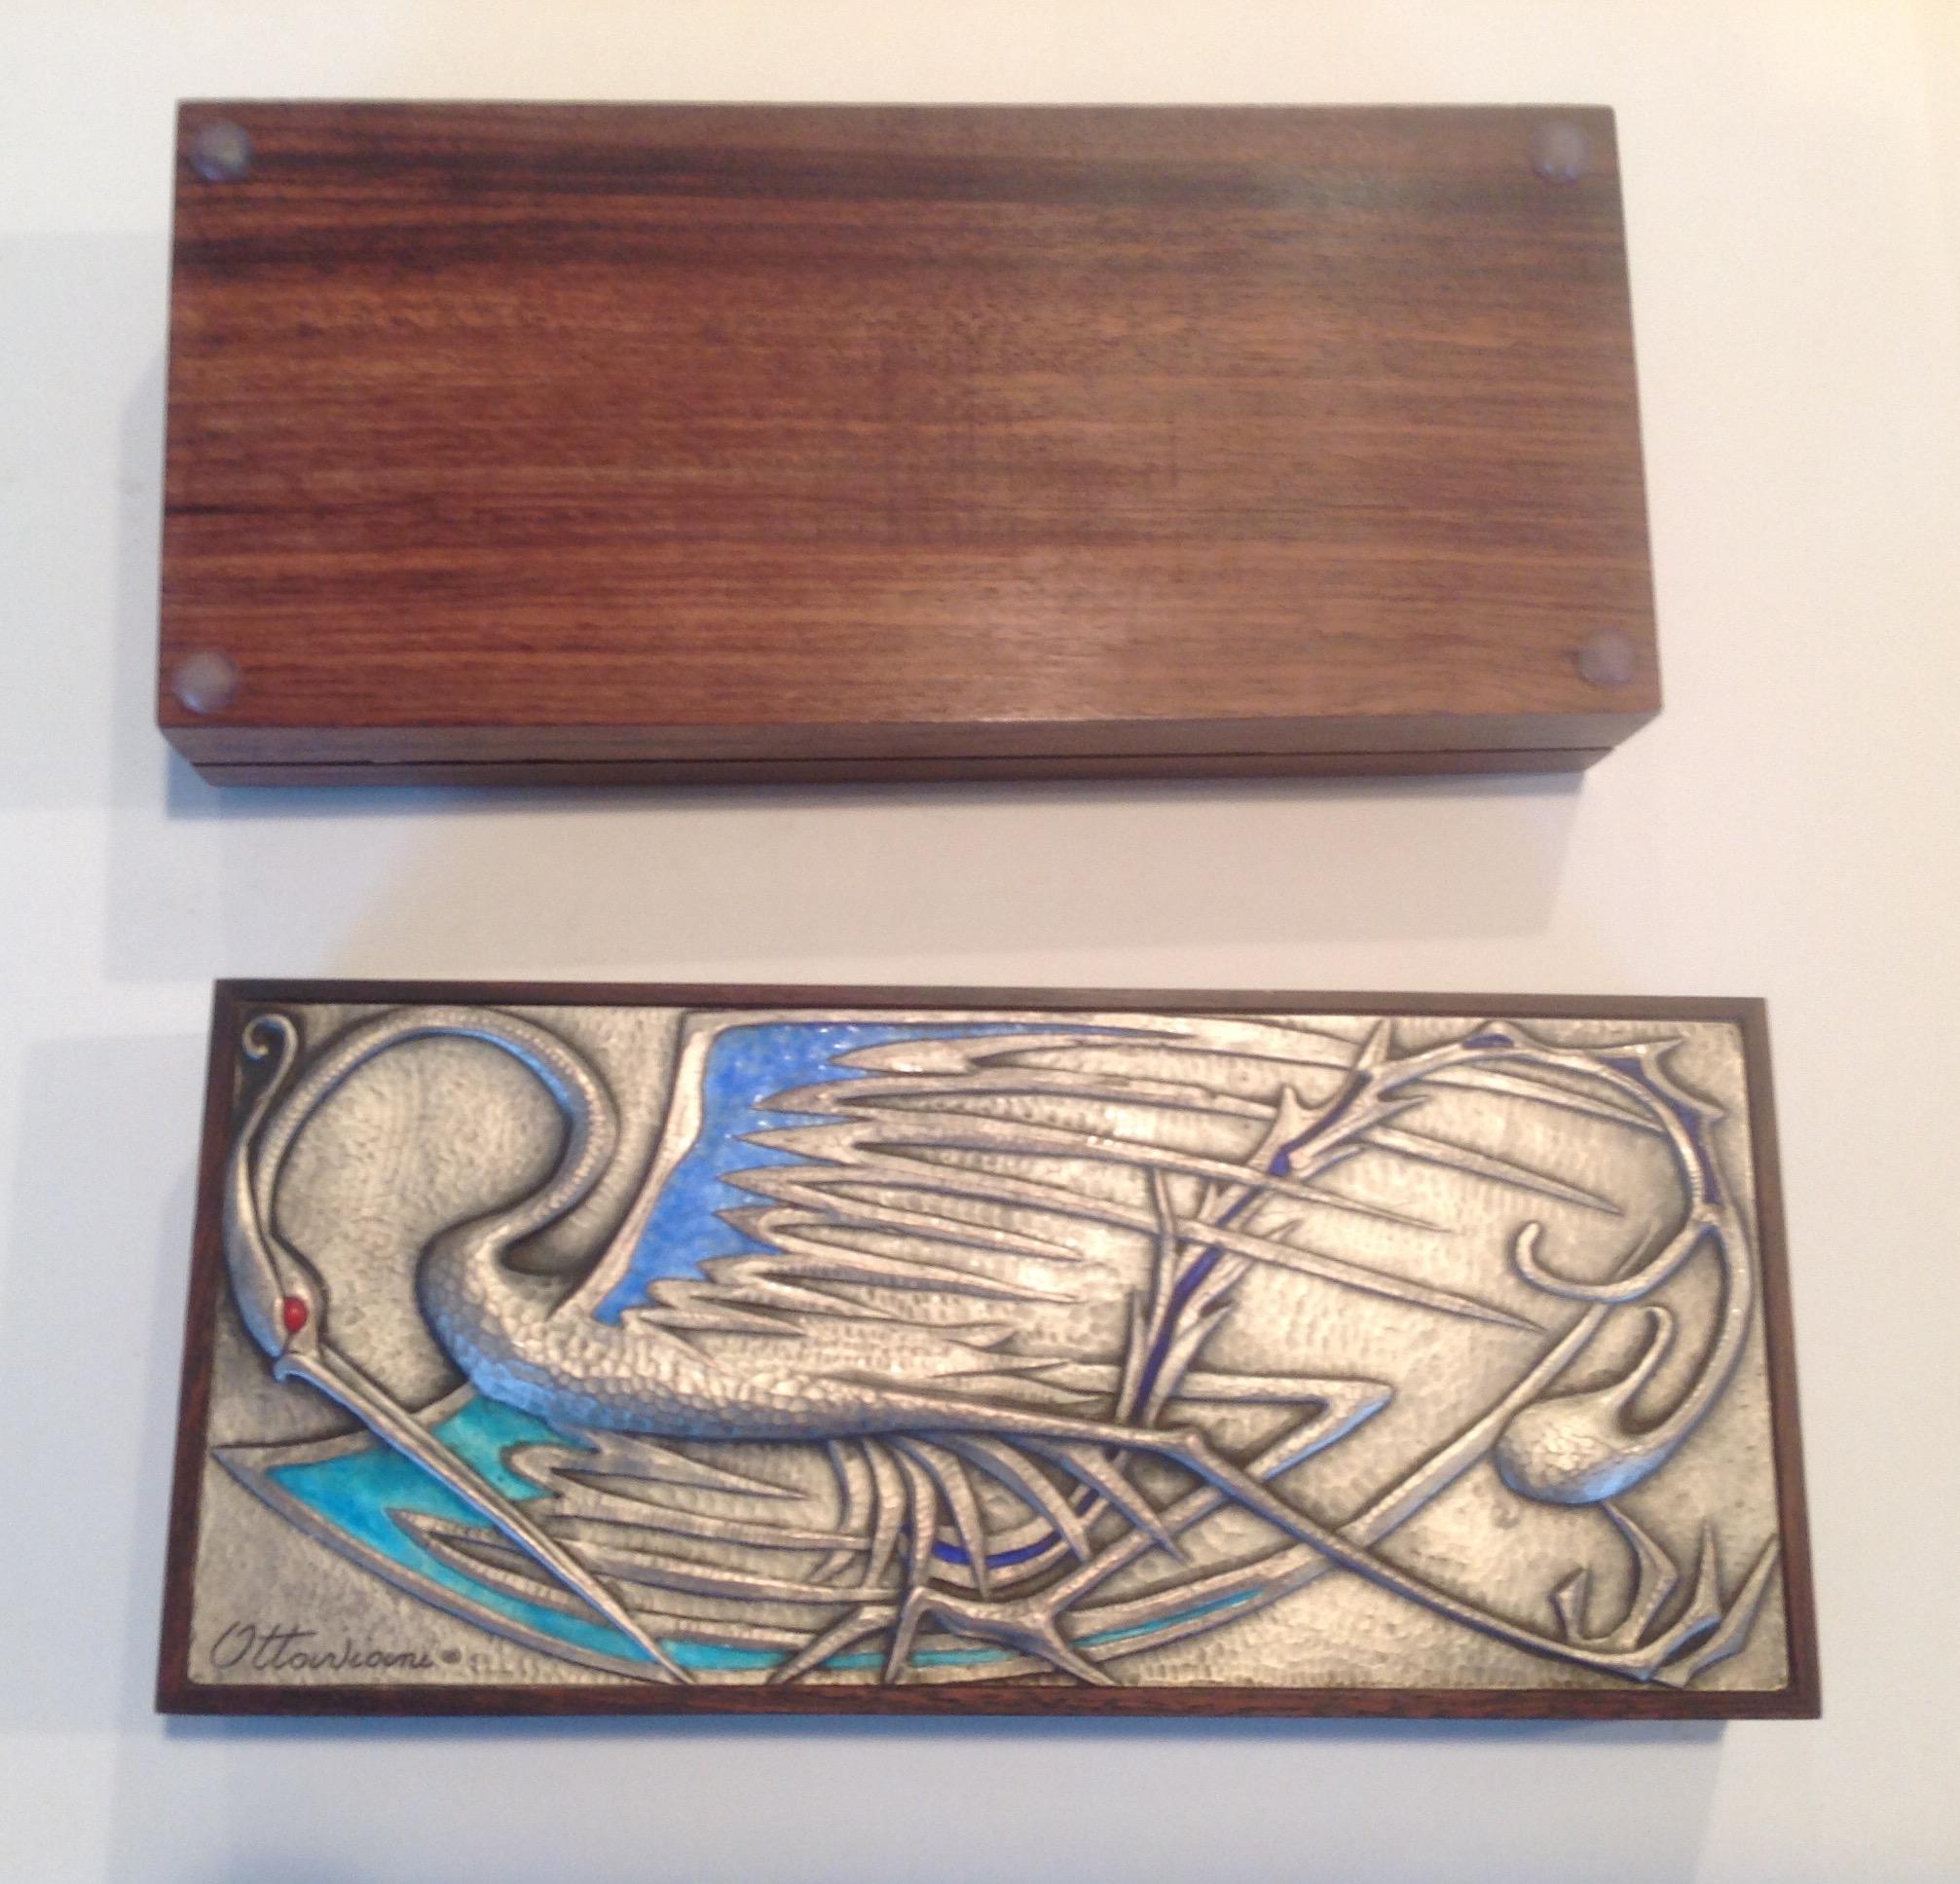 A fine pair of sterling and wood boxes by Italian maker Ottaviani.